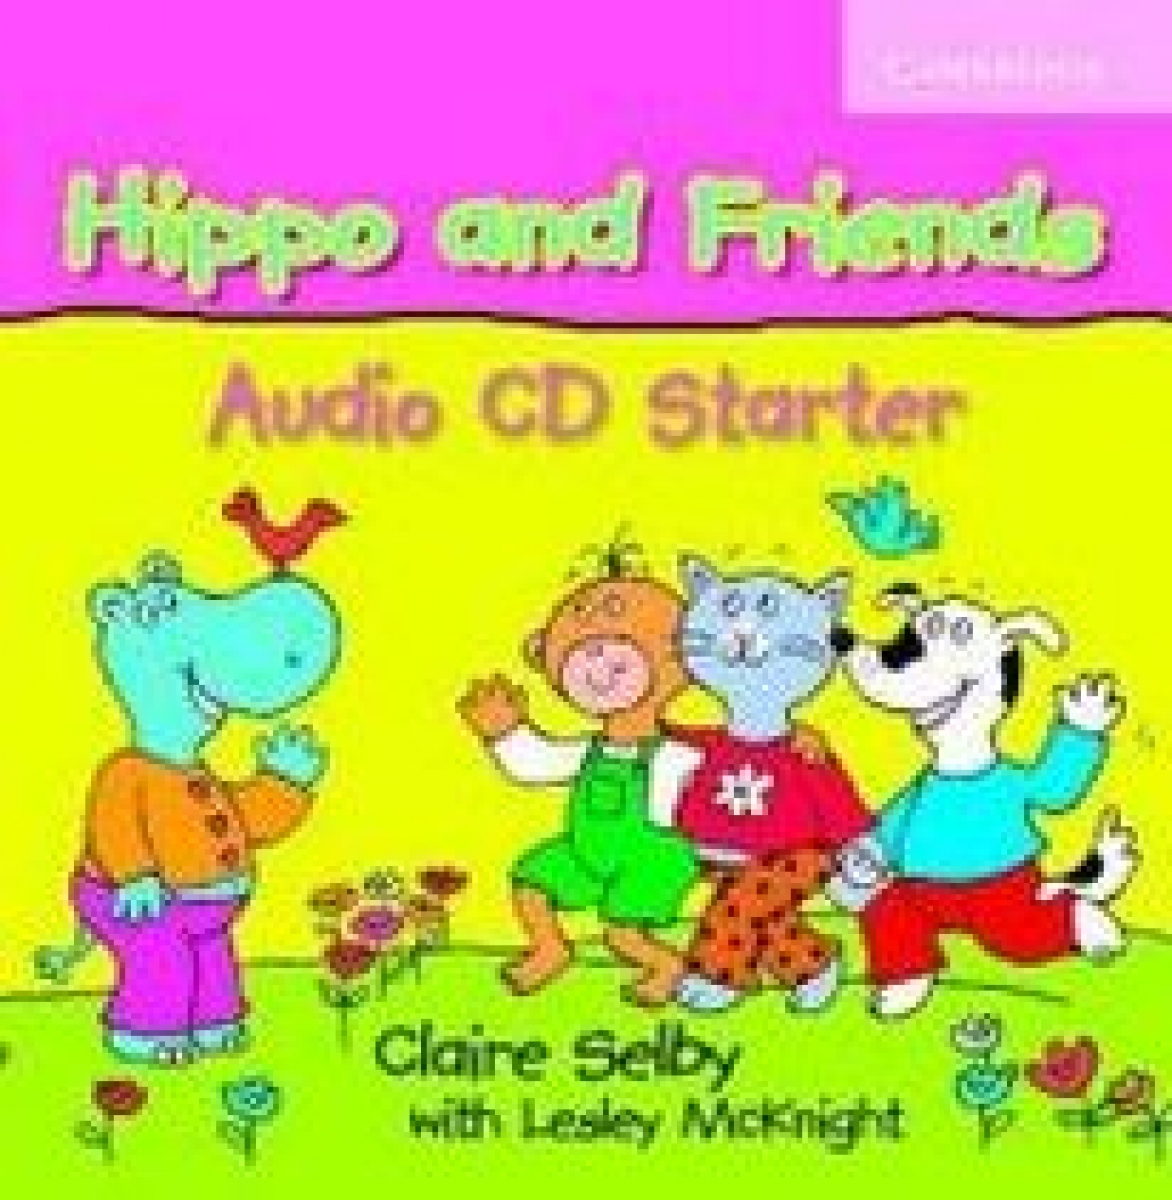 Claire Selby, Lesley McKnight Hippo and Friends Starter Audio CD () 